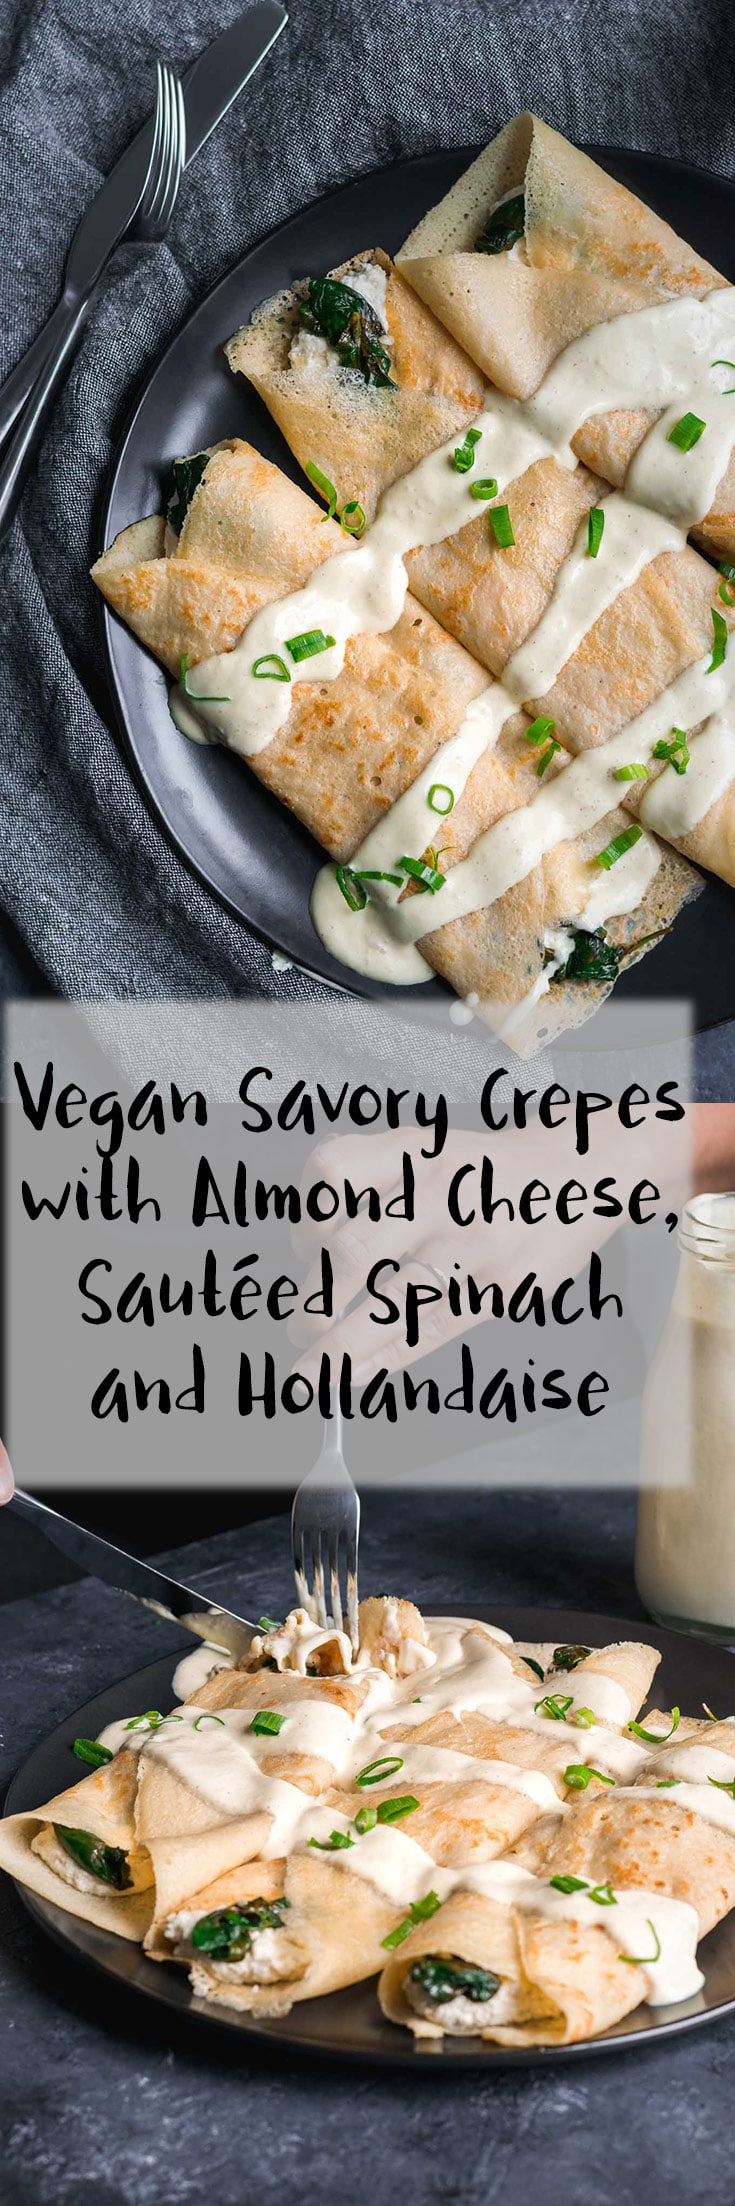 Delicious vegan crepes are stuffed with creamy almond cheese and sautéed spinach and drizzled with warm vegan hollandaise to serve. | thecuriouschickpea.com #vegan #crepes #veganbrunch #vegancheese